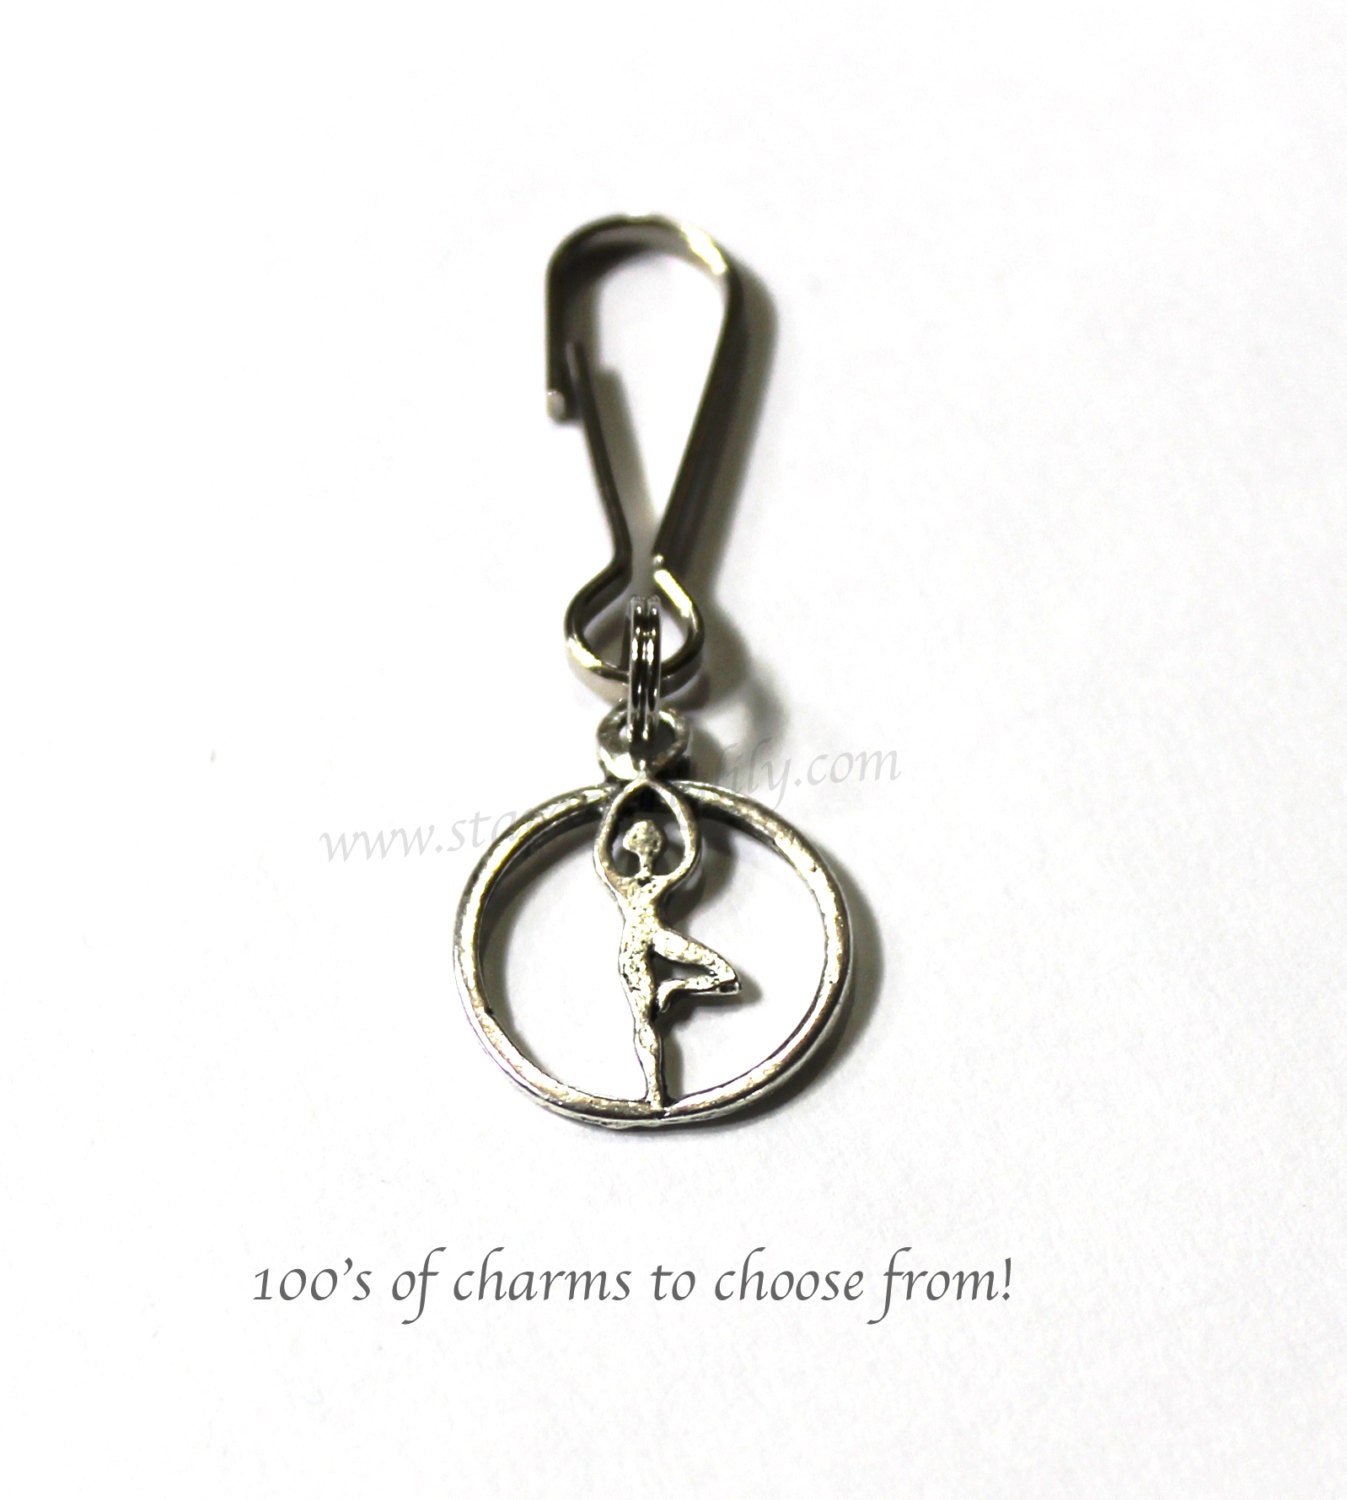 You Choose the Charm Zipper Pull. 100s of charms to choose